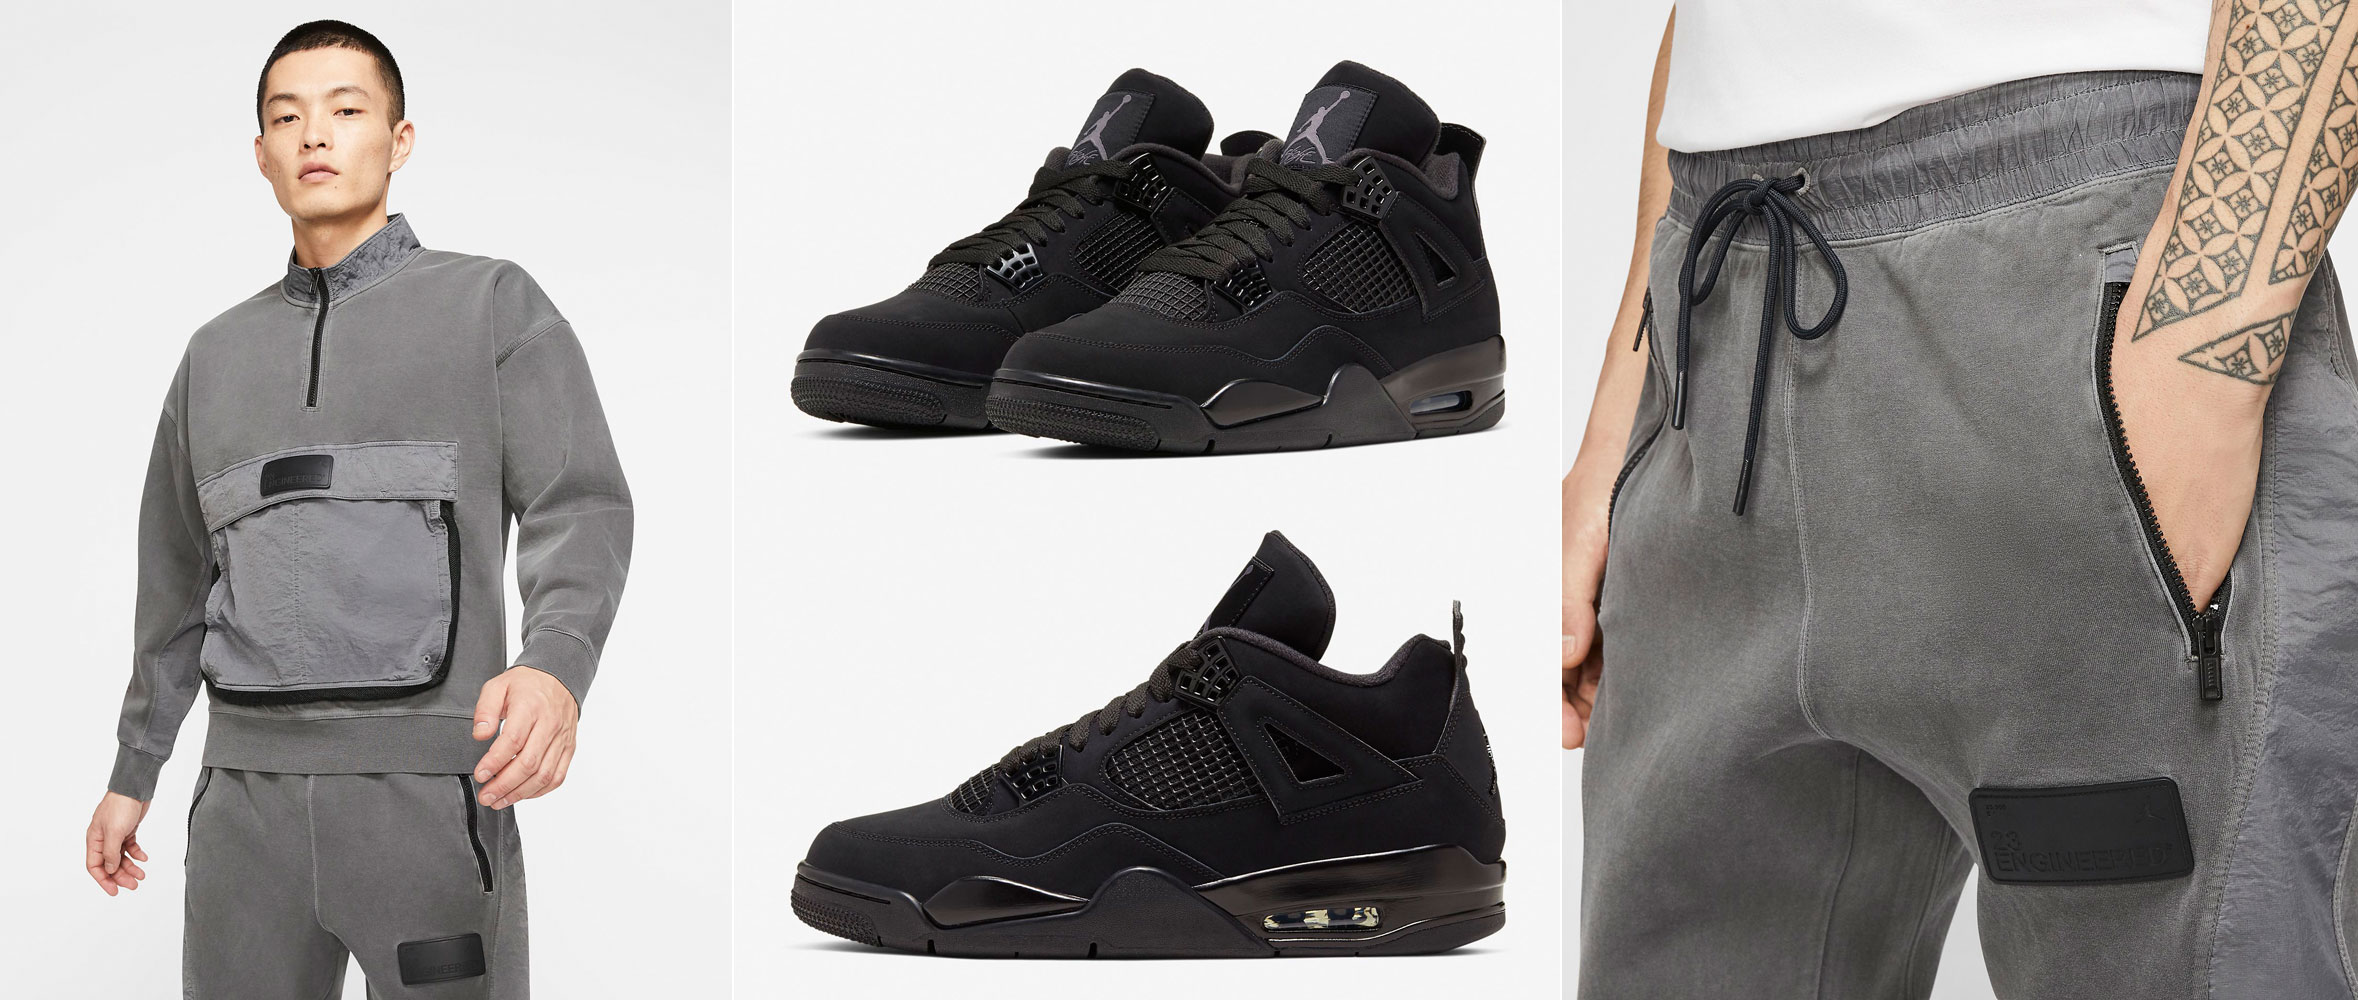 outfits with black jordans